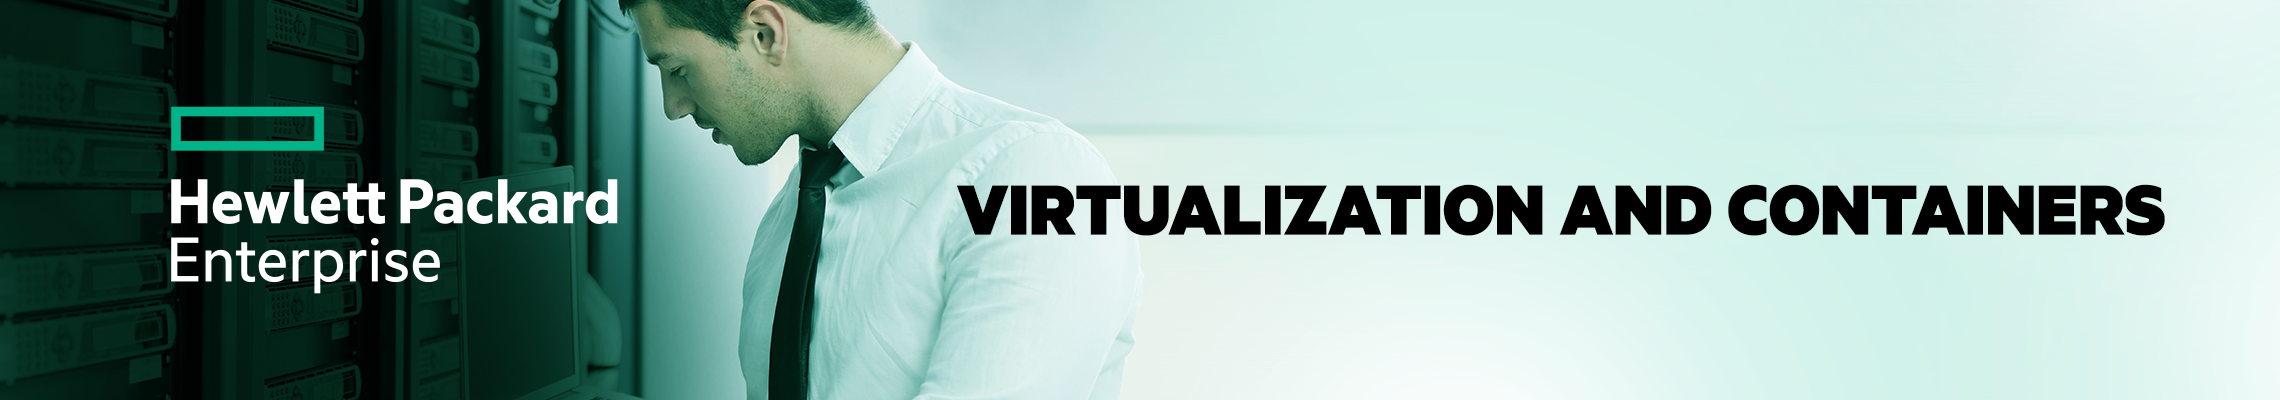 HPE Virtualization and Containers